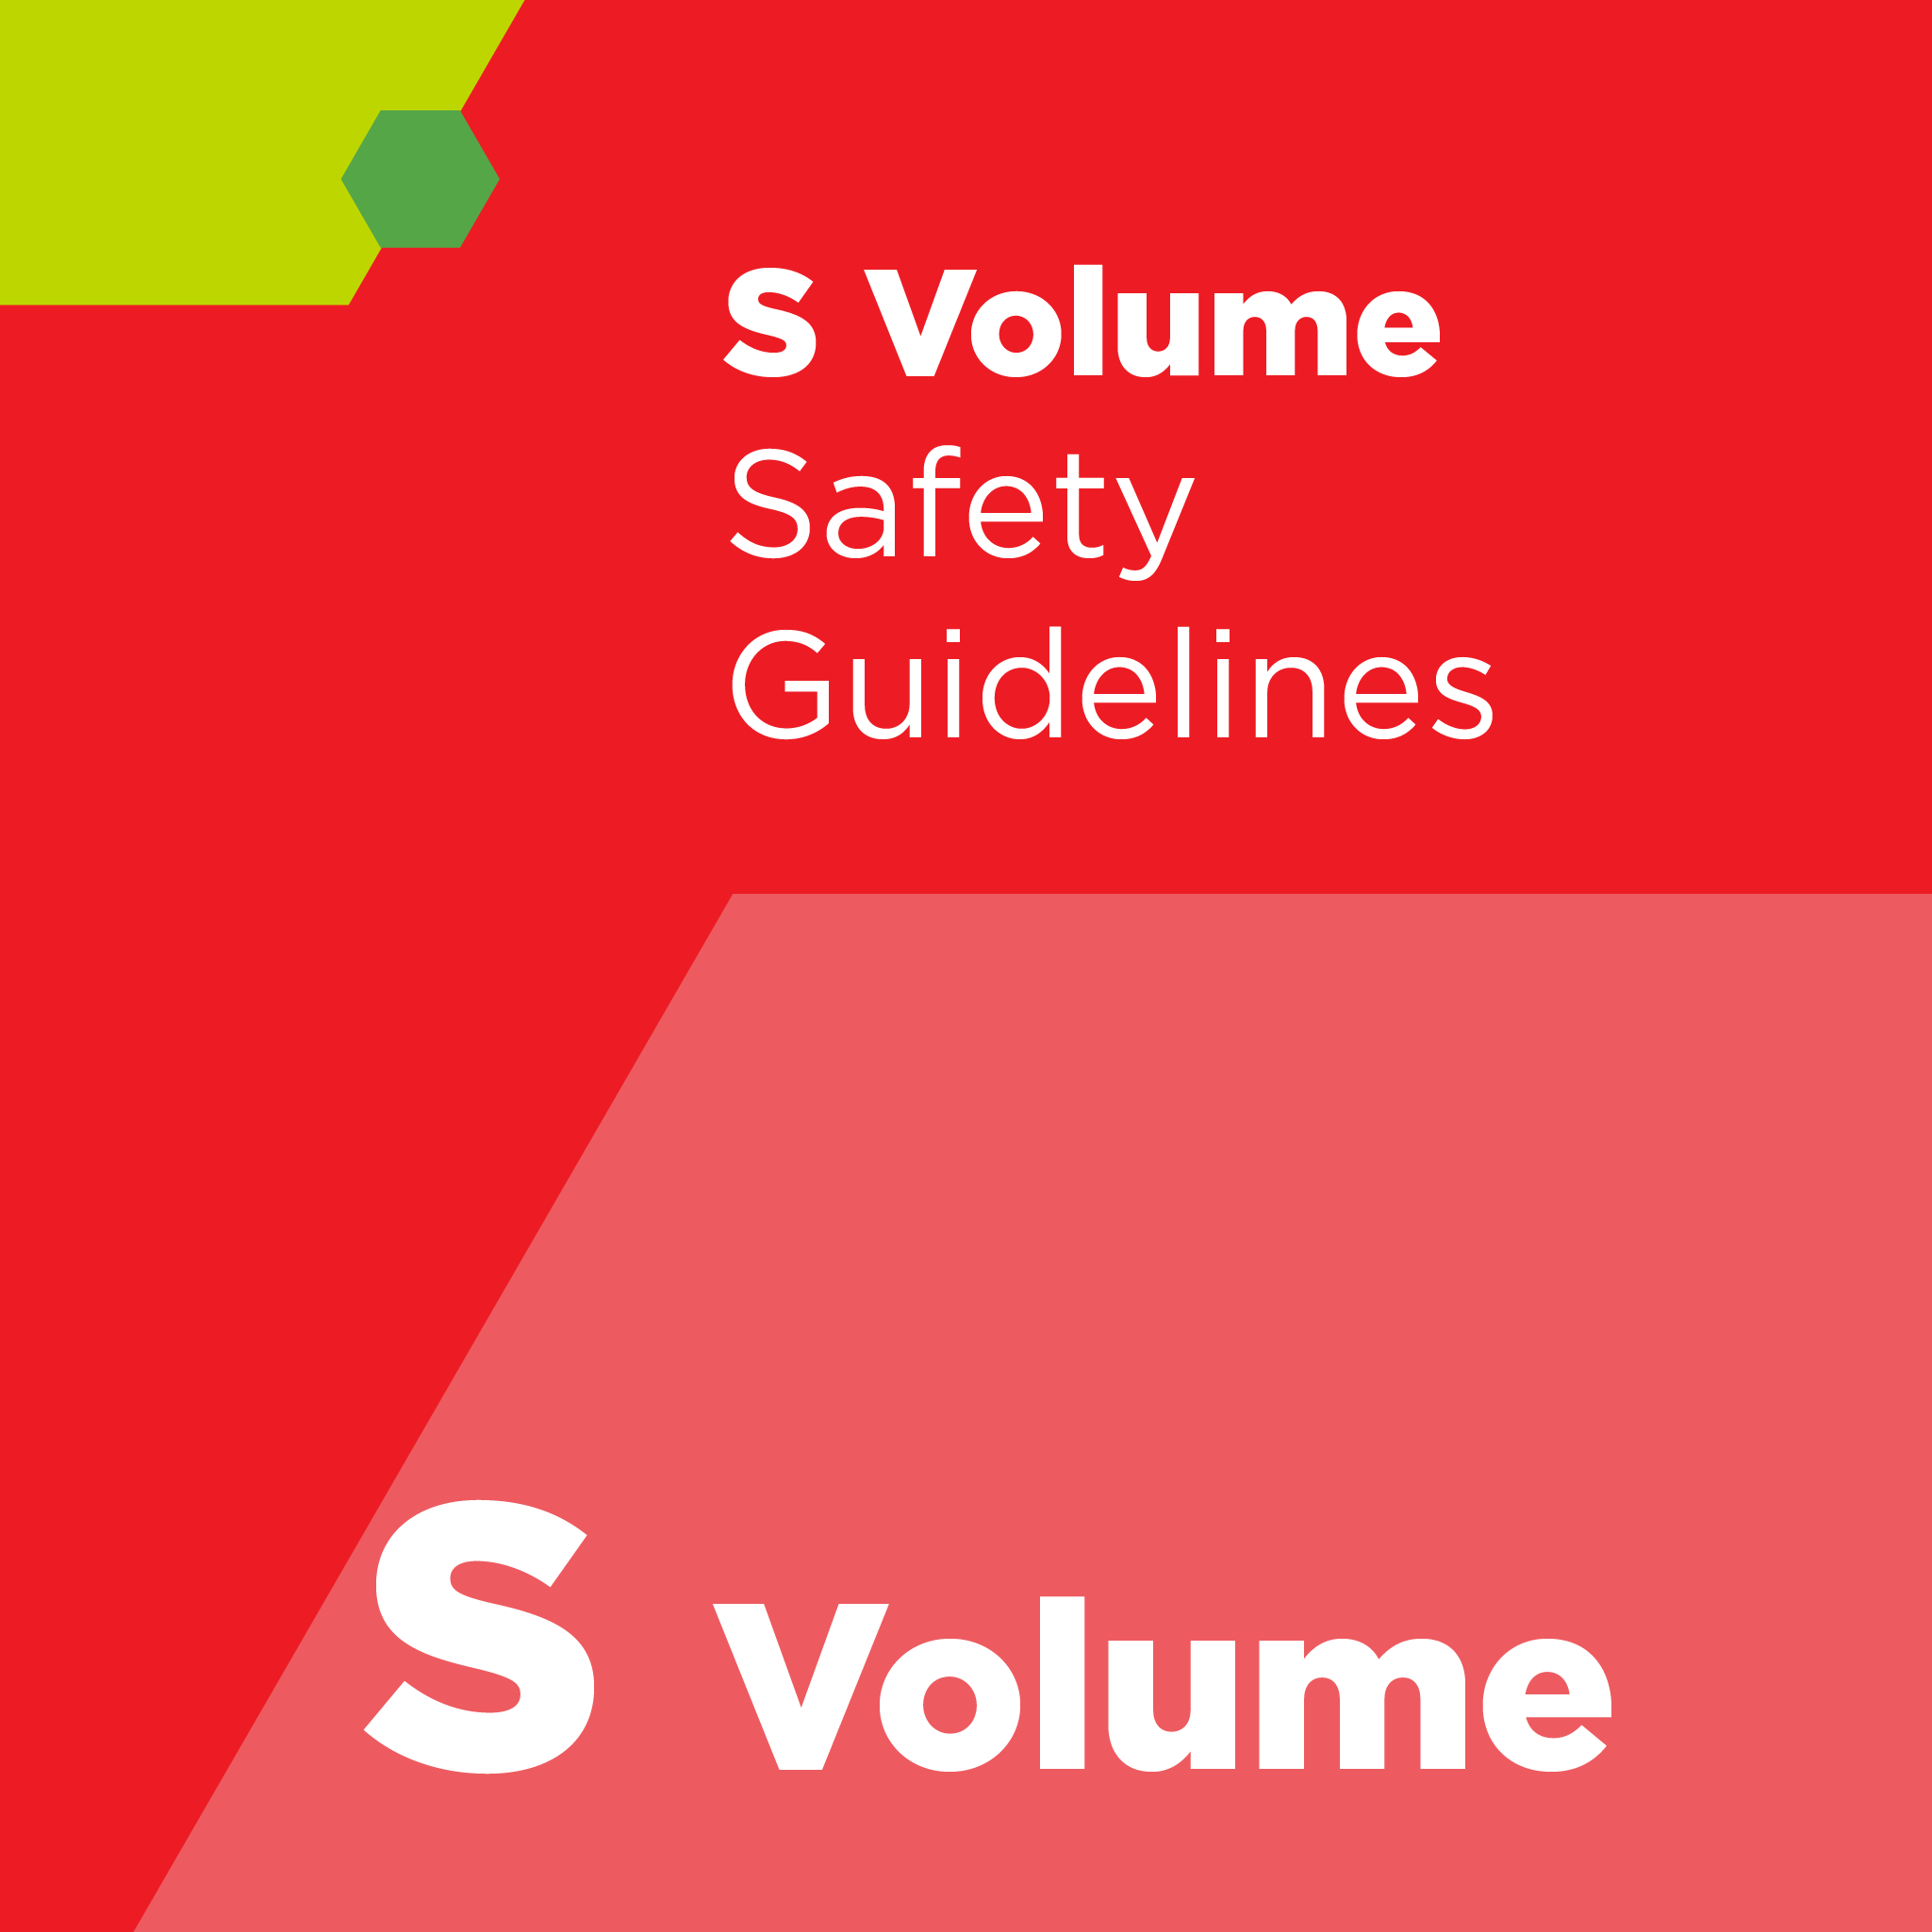 S02500 - SEMI S25 - Safety Guideline for Hydrogen Peroxide Storage & Handling Systems